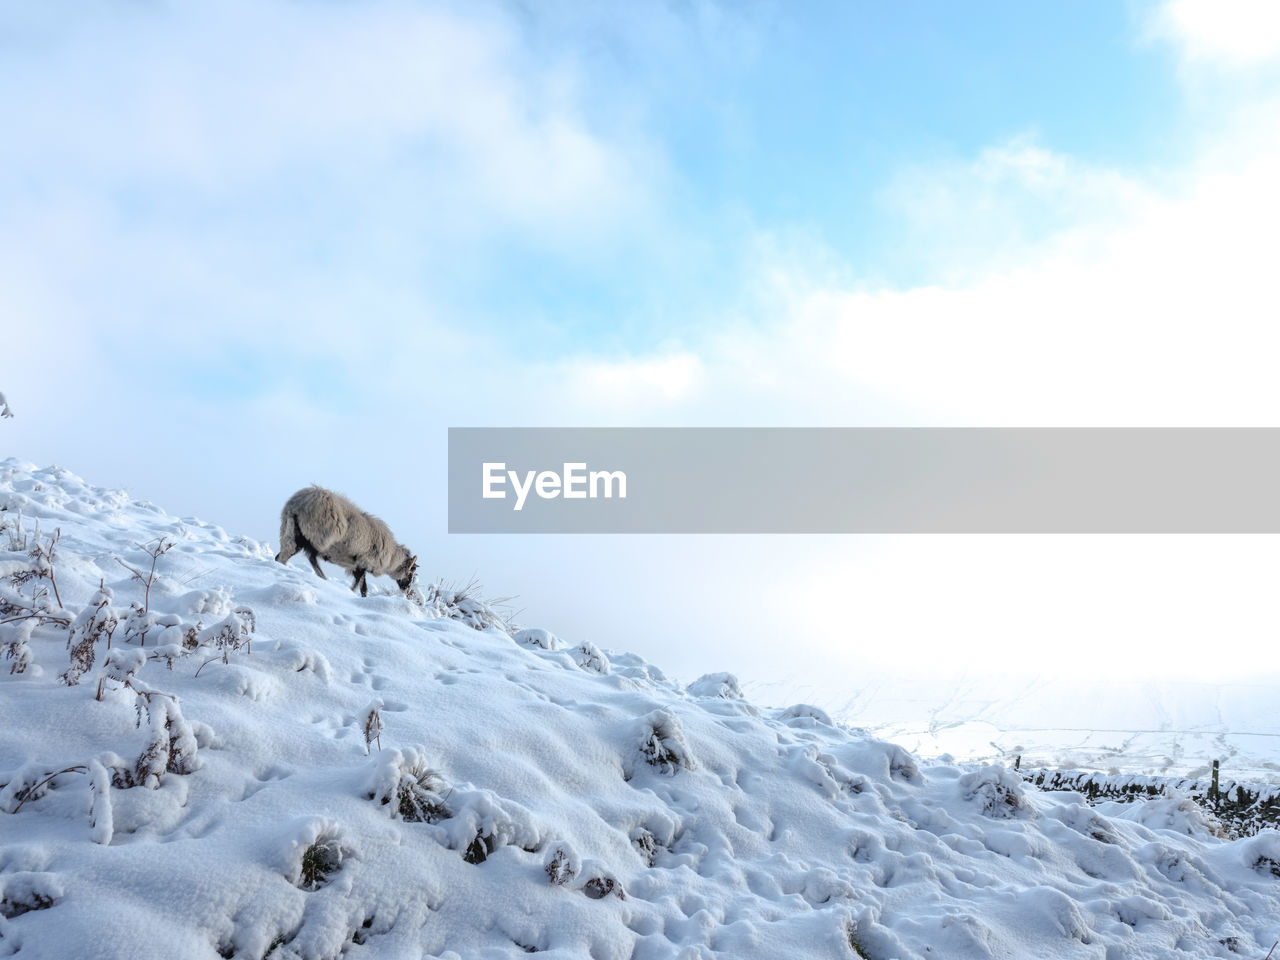 View of a sheep on snow covered land